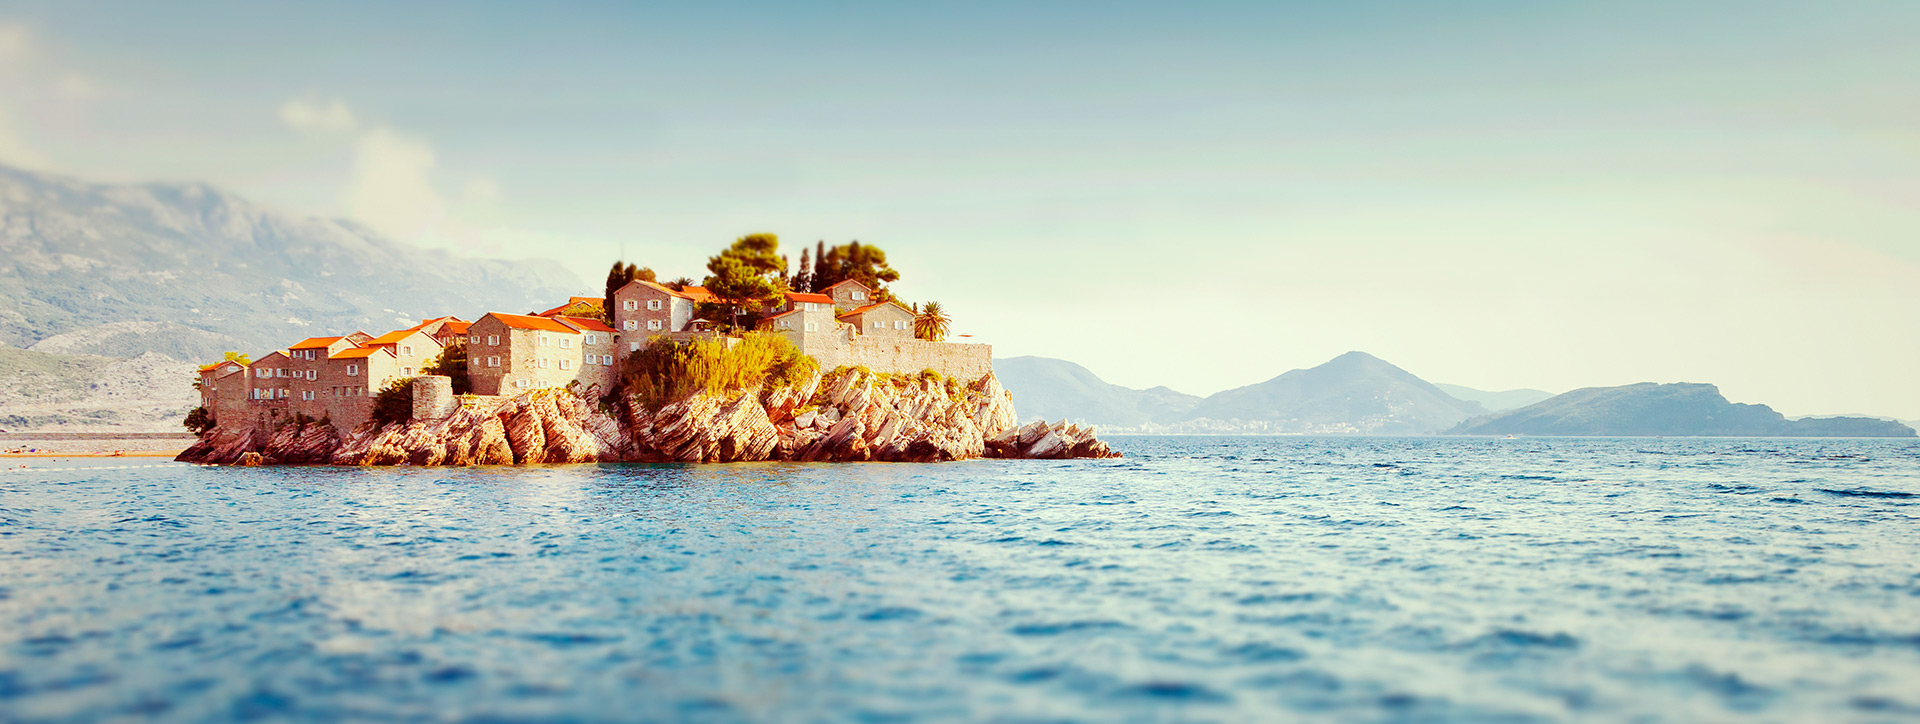 A view of the Sveti Stefan island from the sea, Montenegro - SimpleSail sailing routes